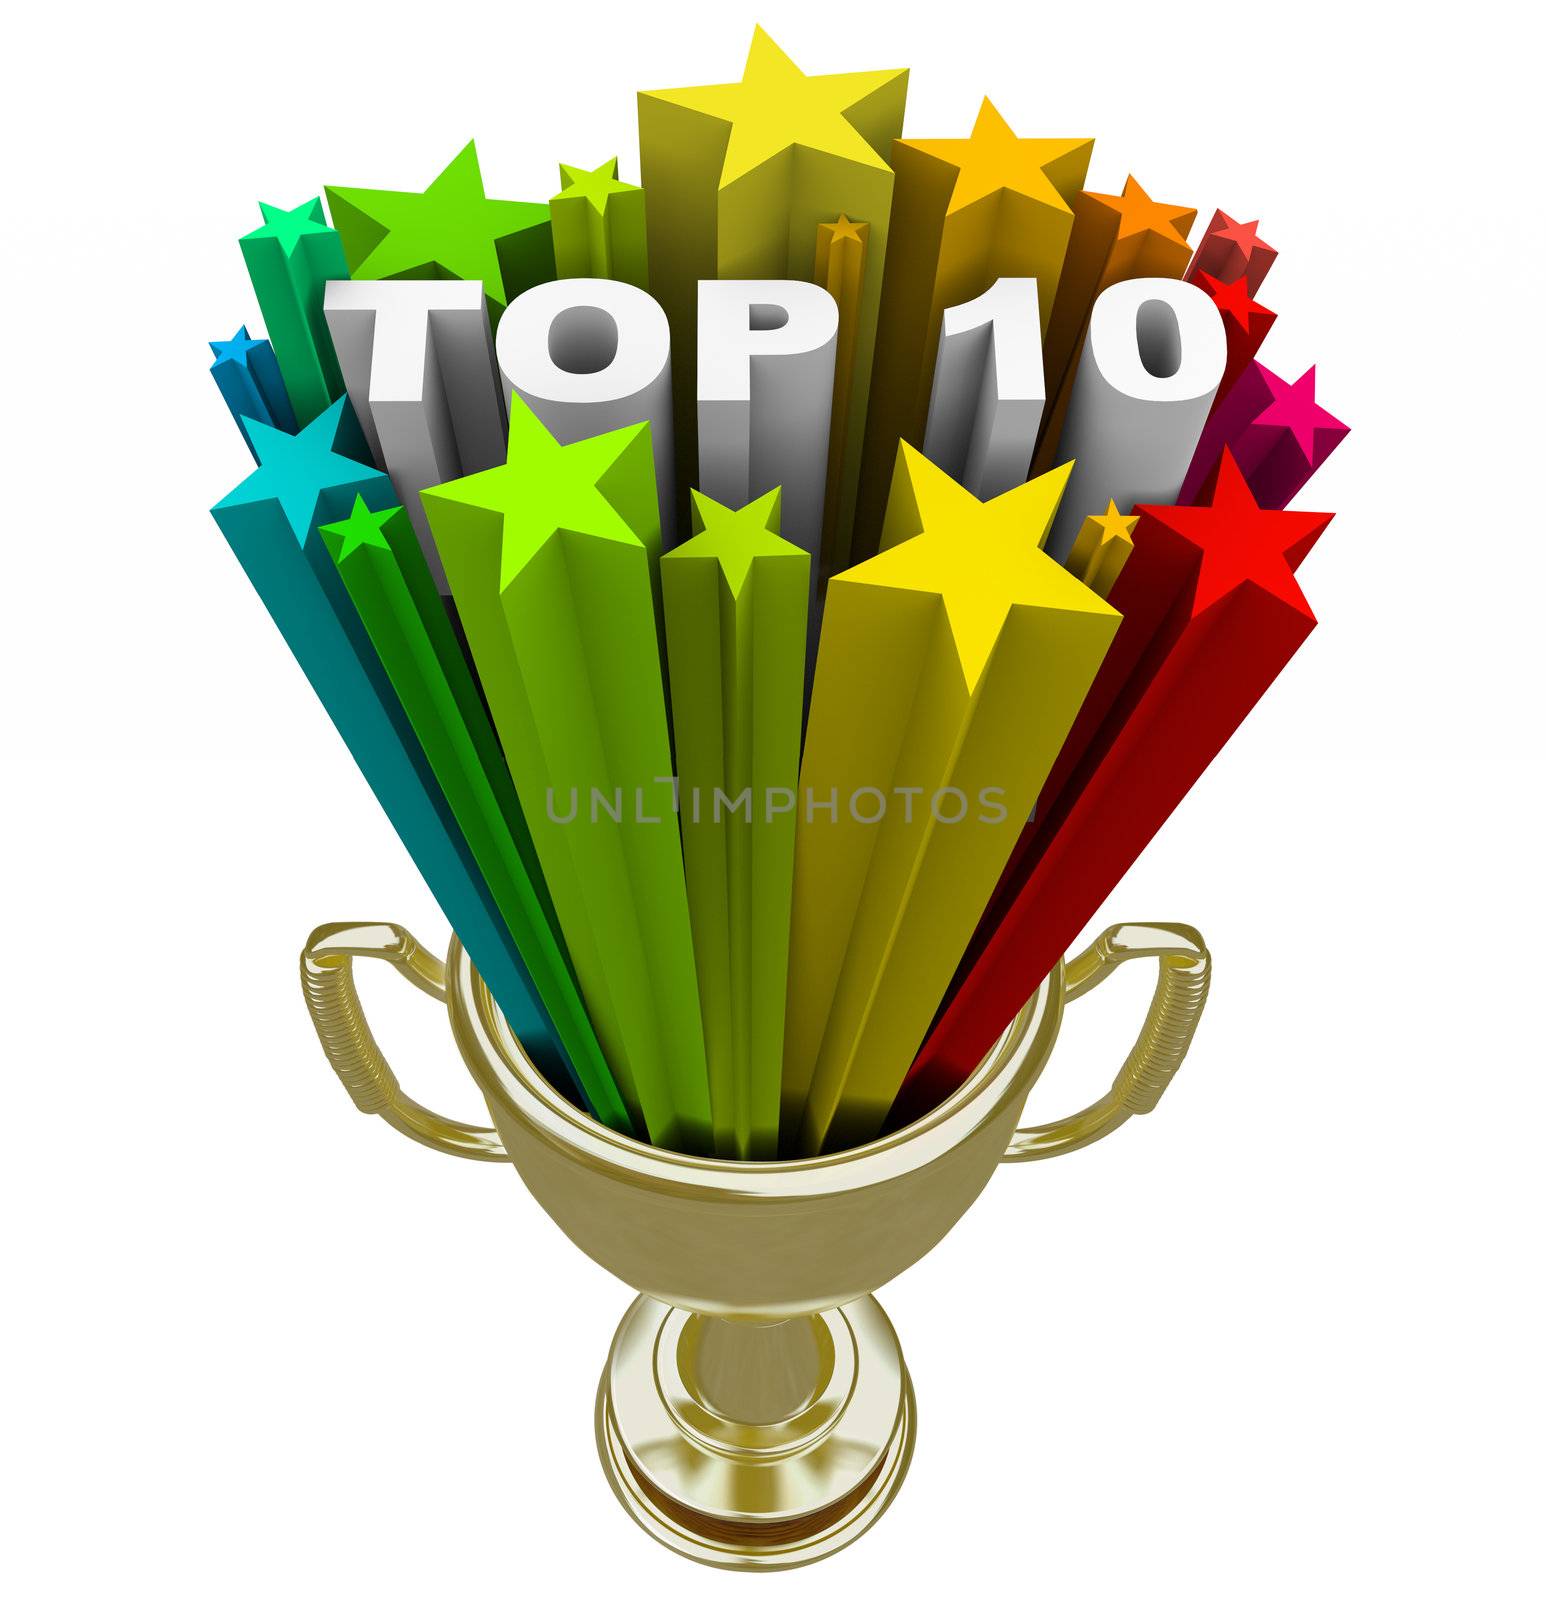 A golden with the words Top 10 in a burst of colorful stars, illustrating the ten choices that have reached the highest pinnacle of success singled out as finalists or best picks